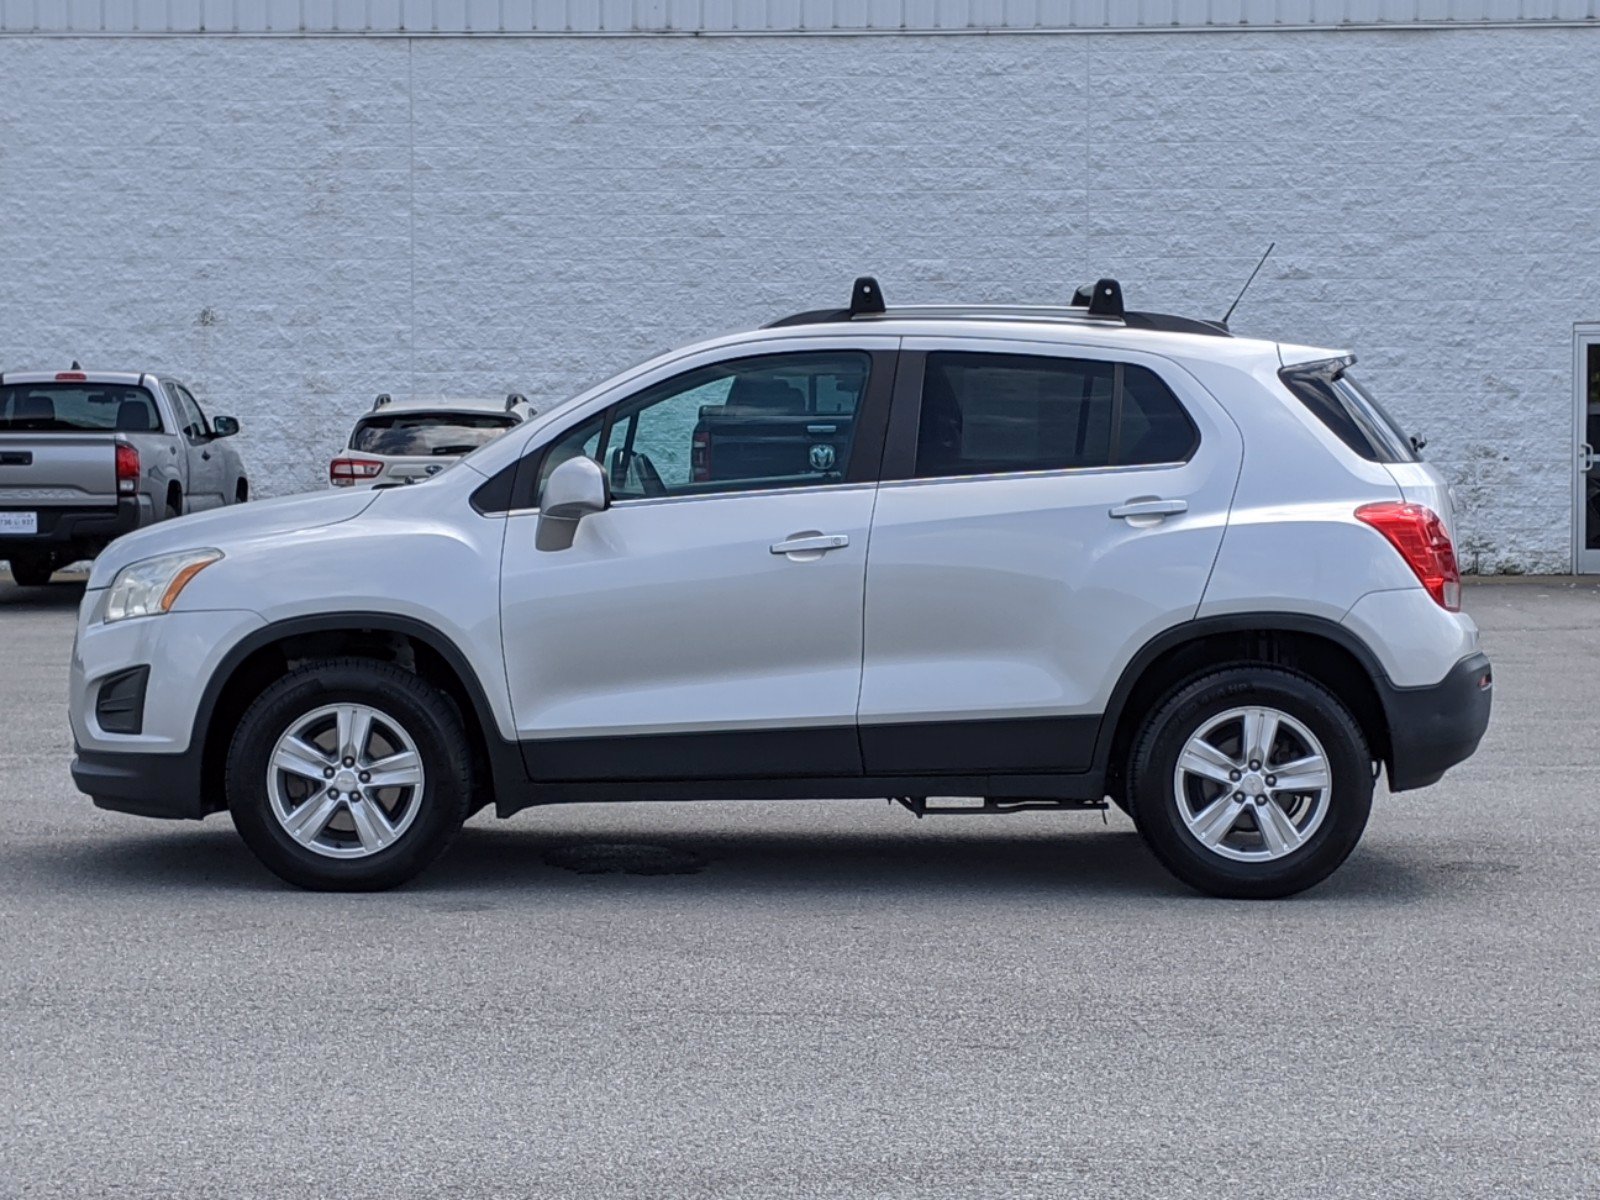 2016 chevy trax awd radio features